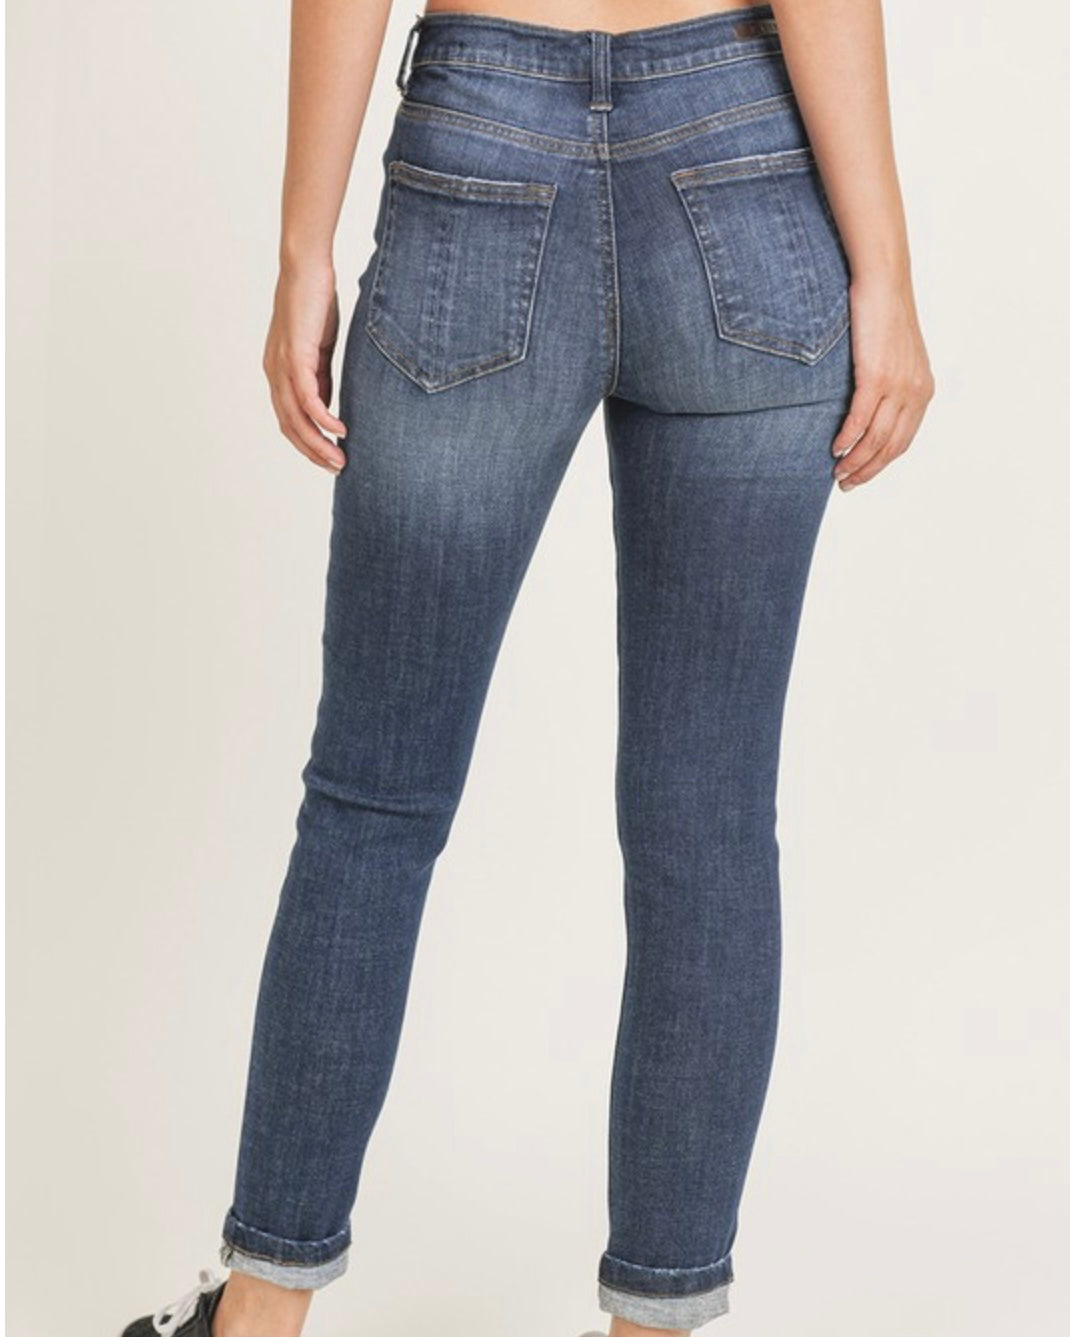 The Jodie Jeans